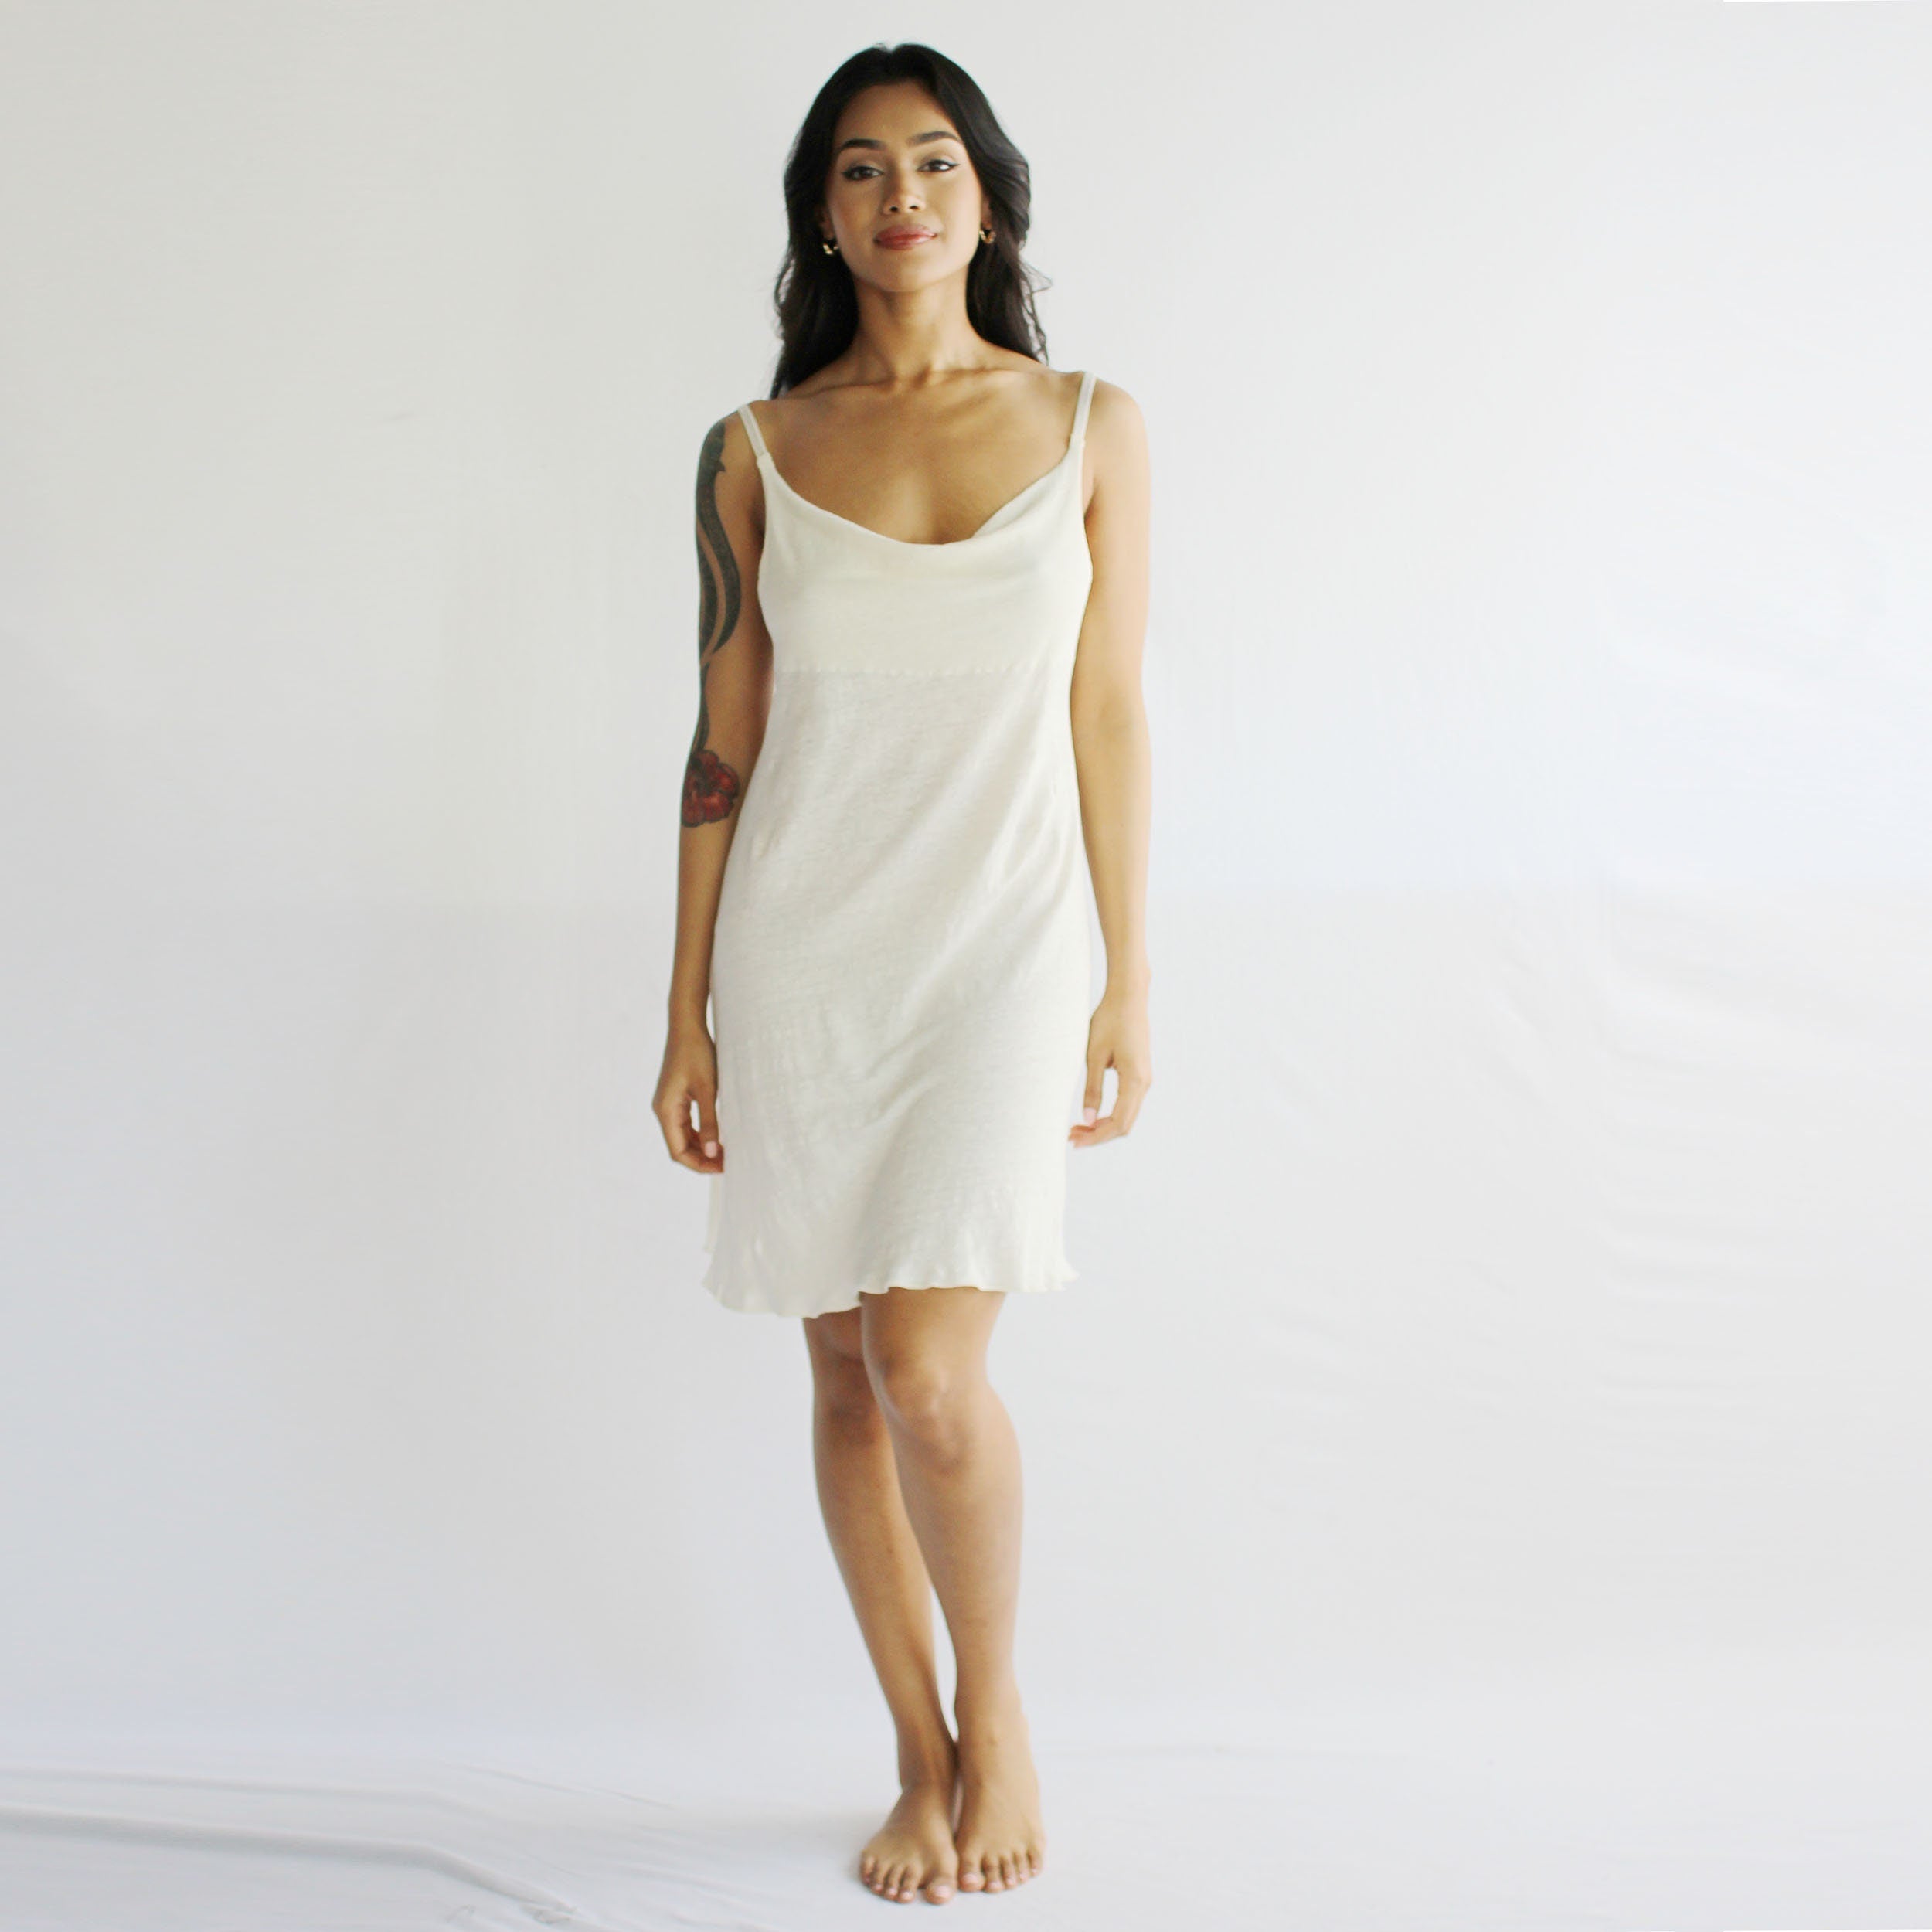 Sheer Linen Knit Nightgown with simple draped neckline, Linen Pajamas, Natural Sleepwear, Made to Order, Made in the USA